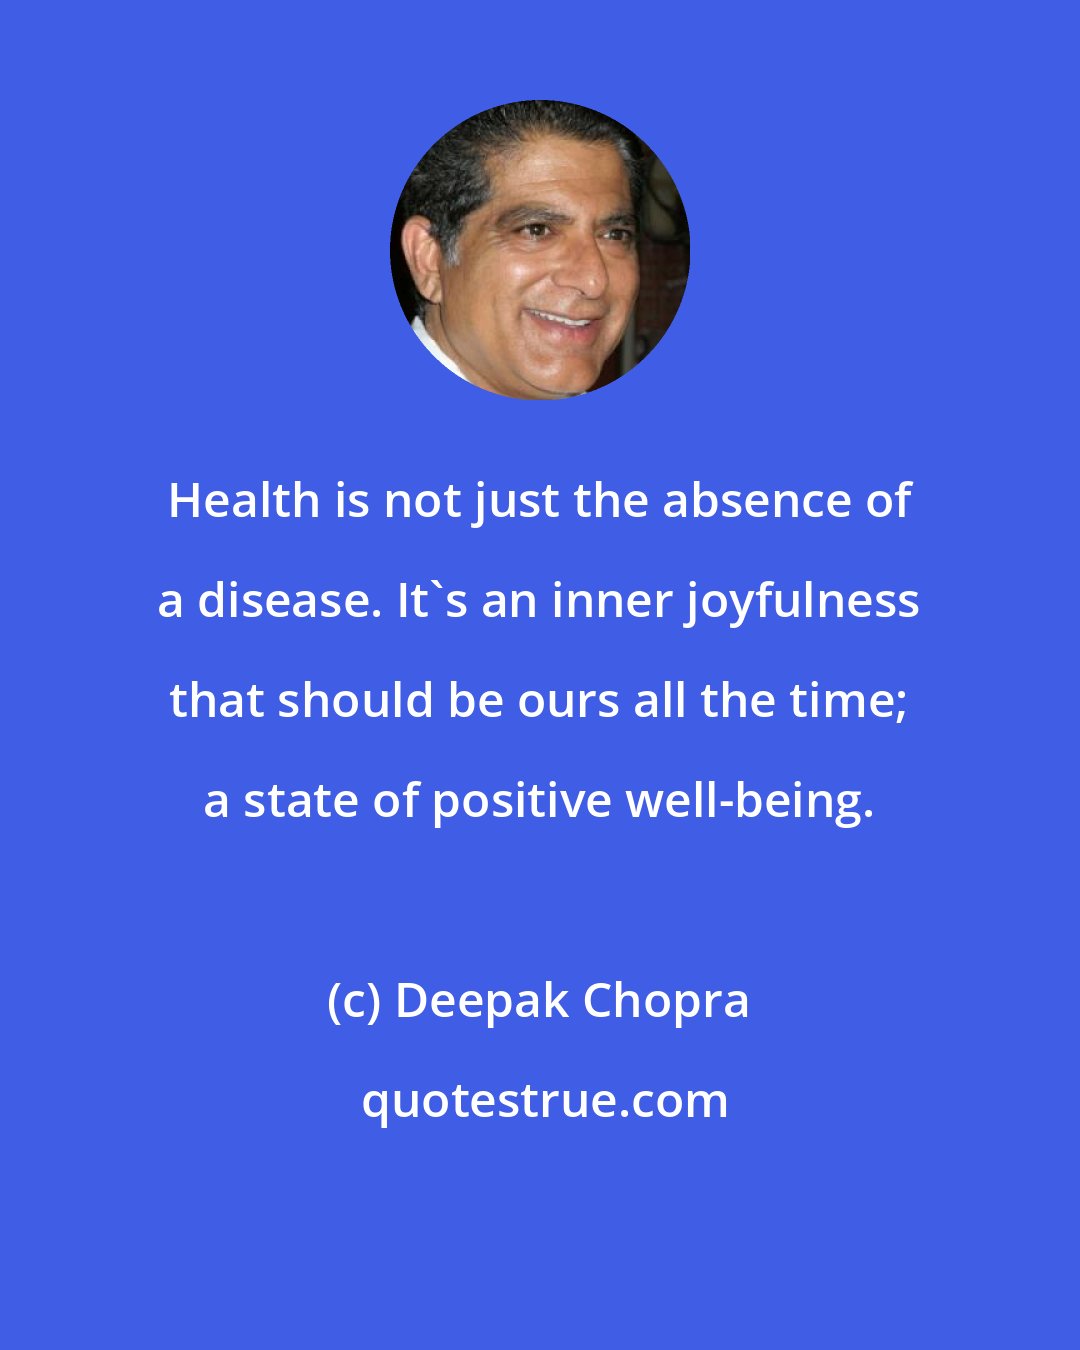 Deepak Chopra: Health is not just the absence of a disease. It's an inner joyfulness that should be ours all the time; a state of positive well-being.